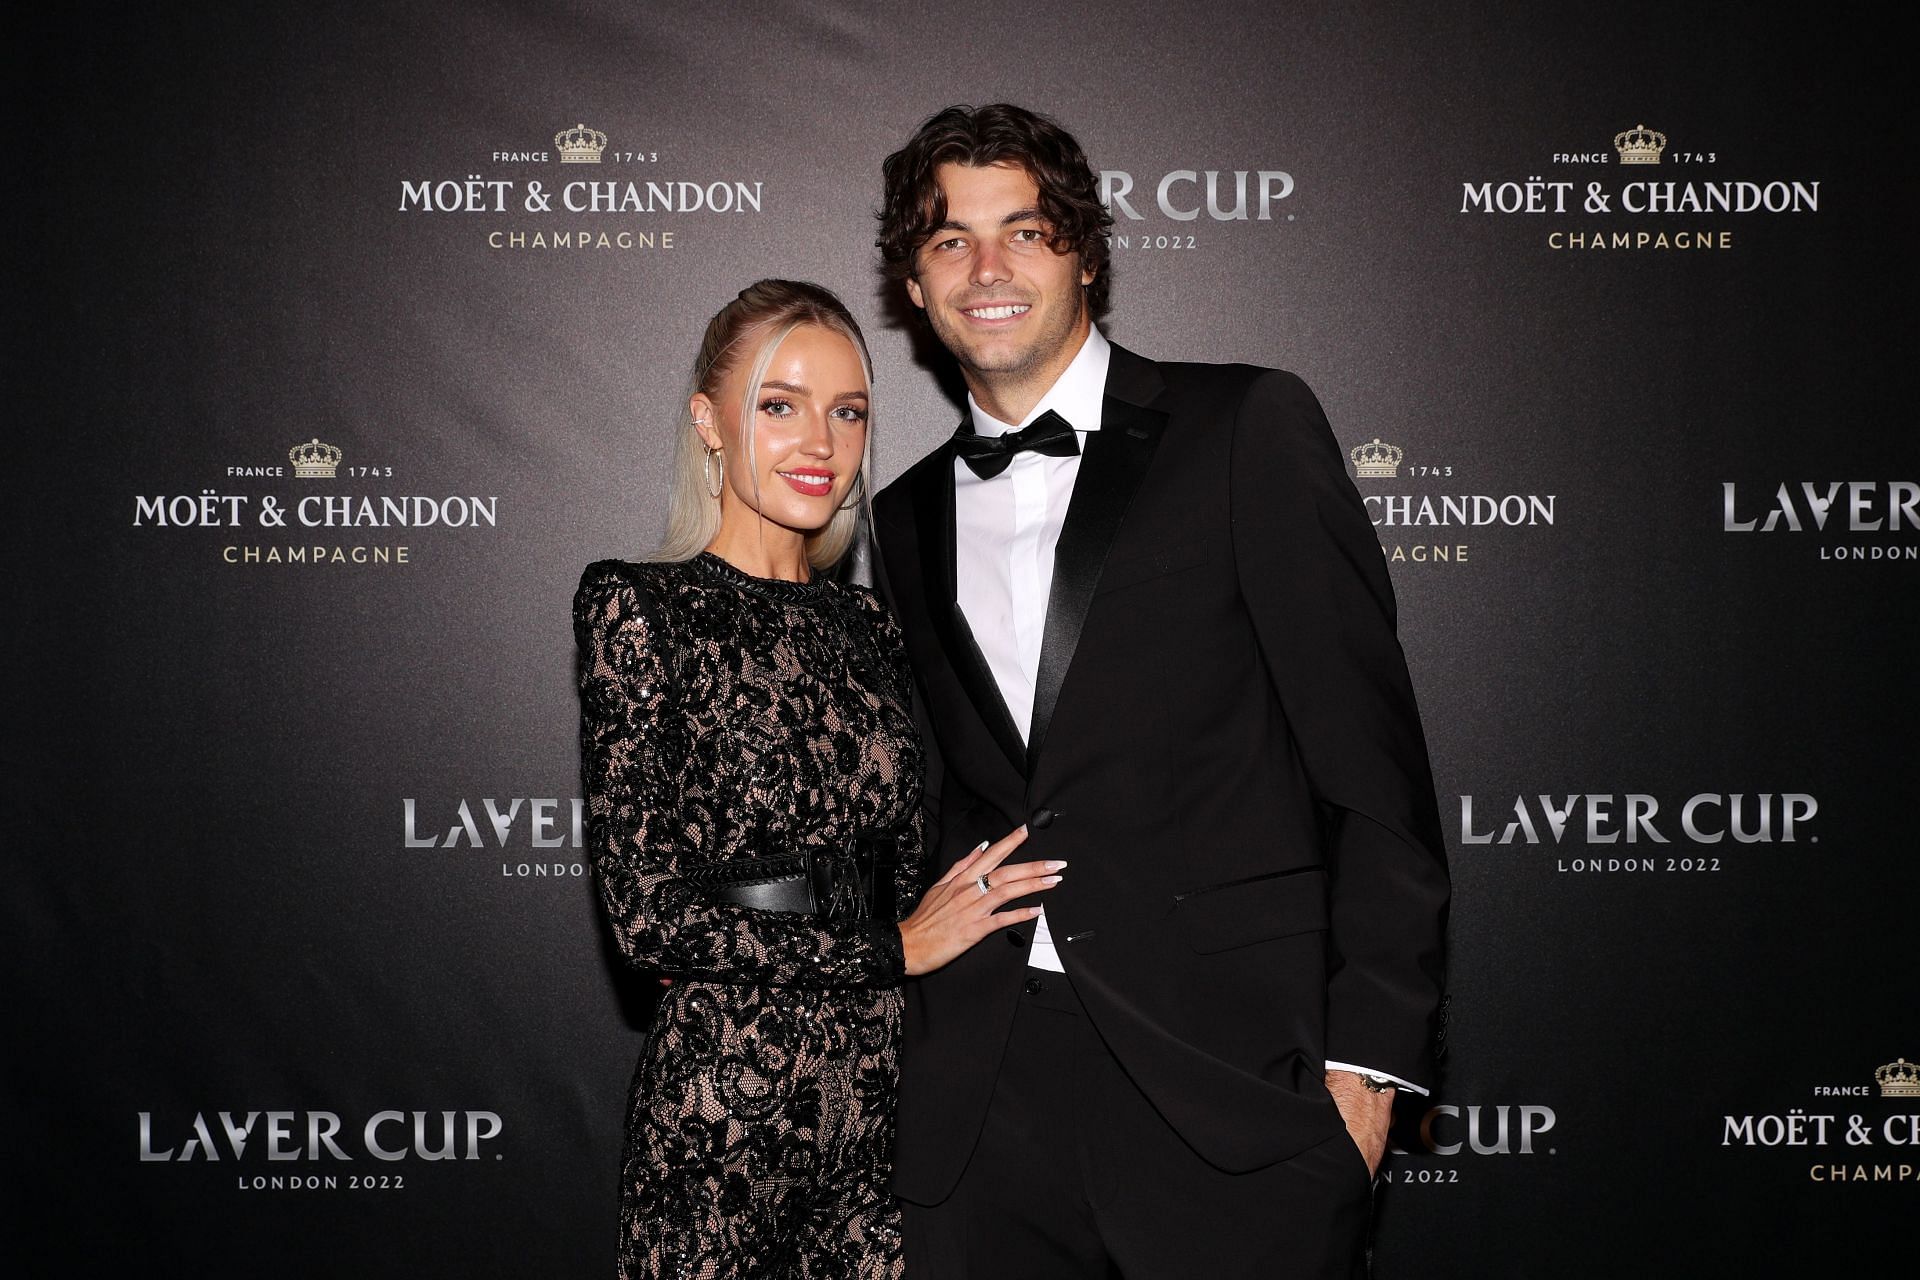 Taylor Fritz and girlfriend Morgan Riddle at Laver Cup 2022